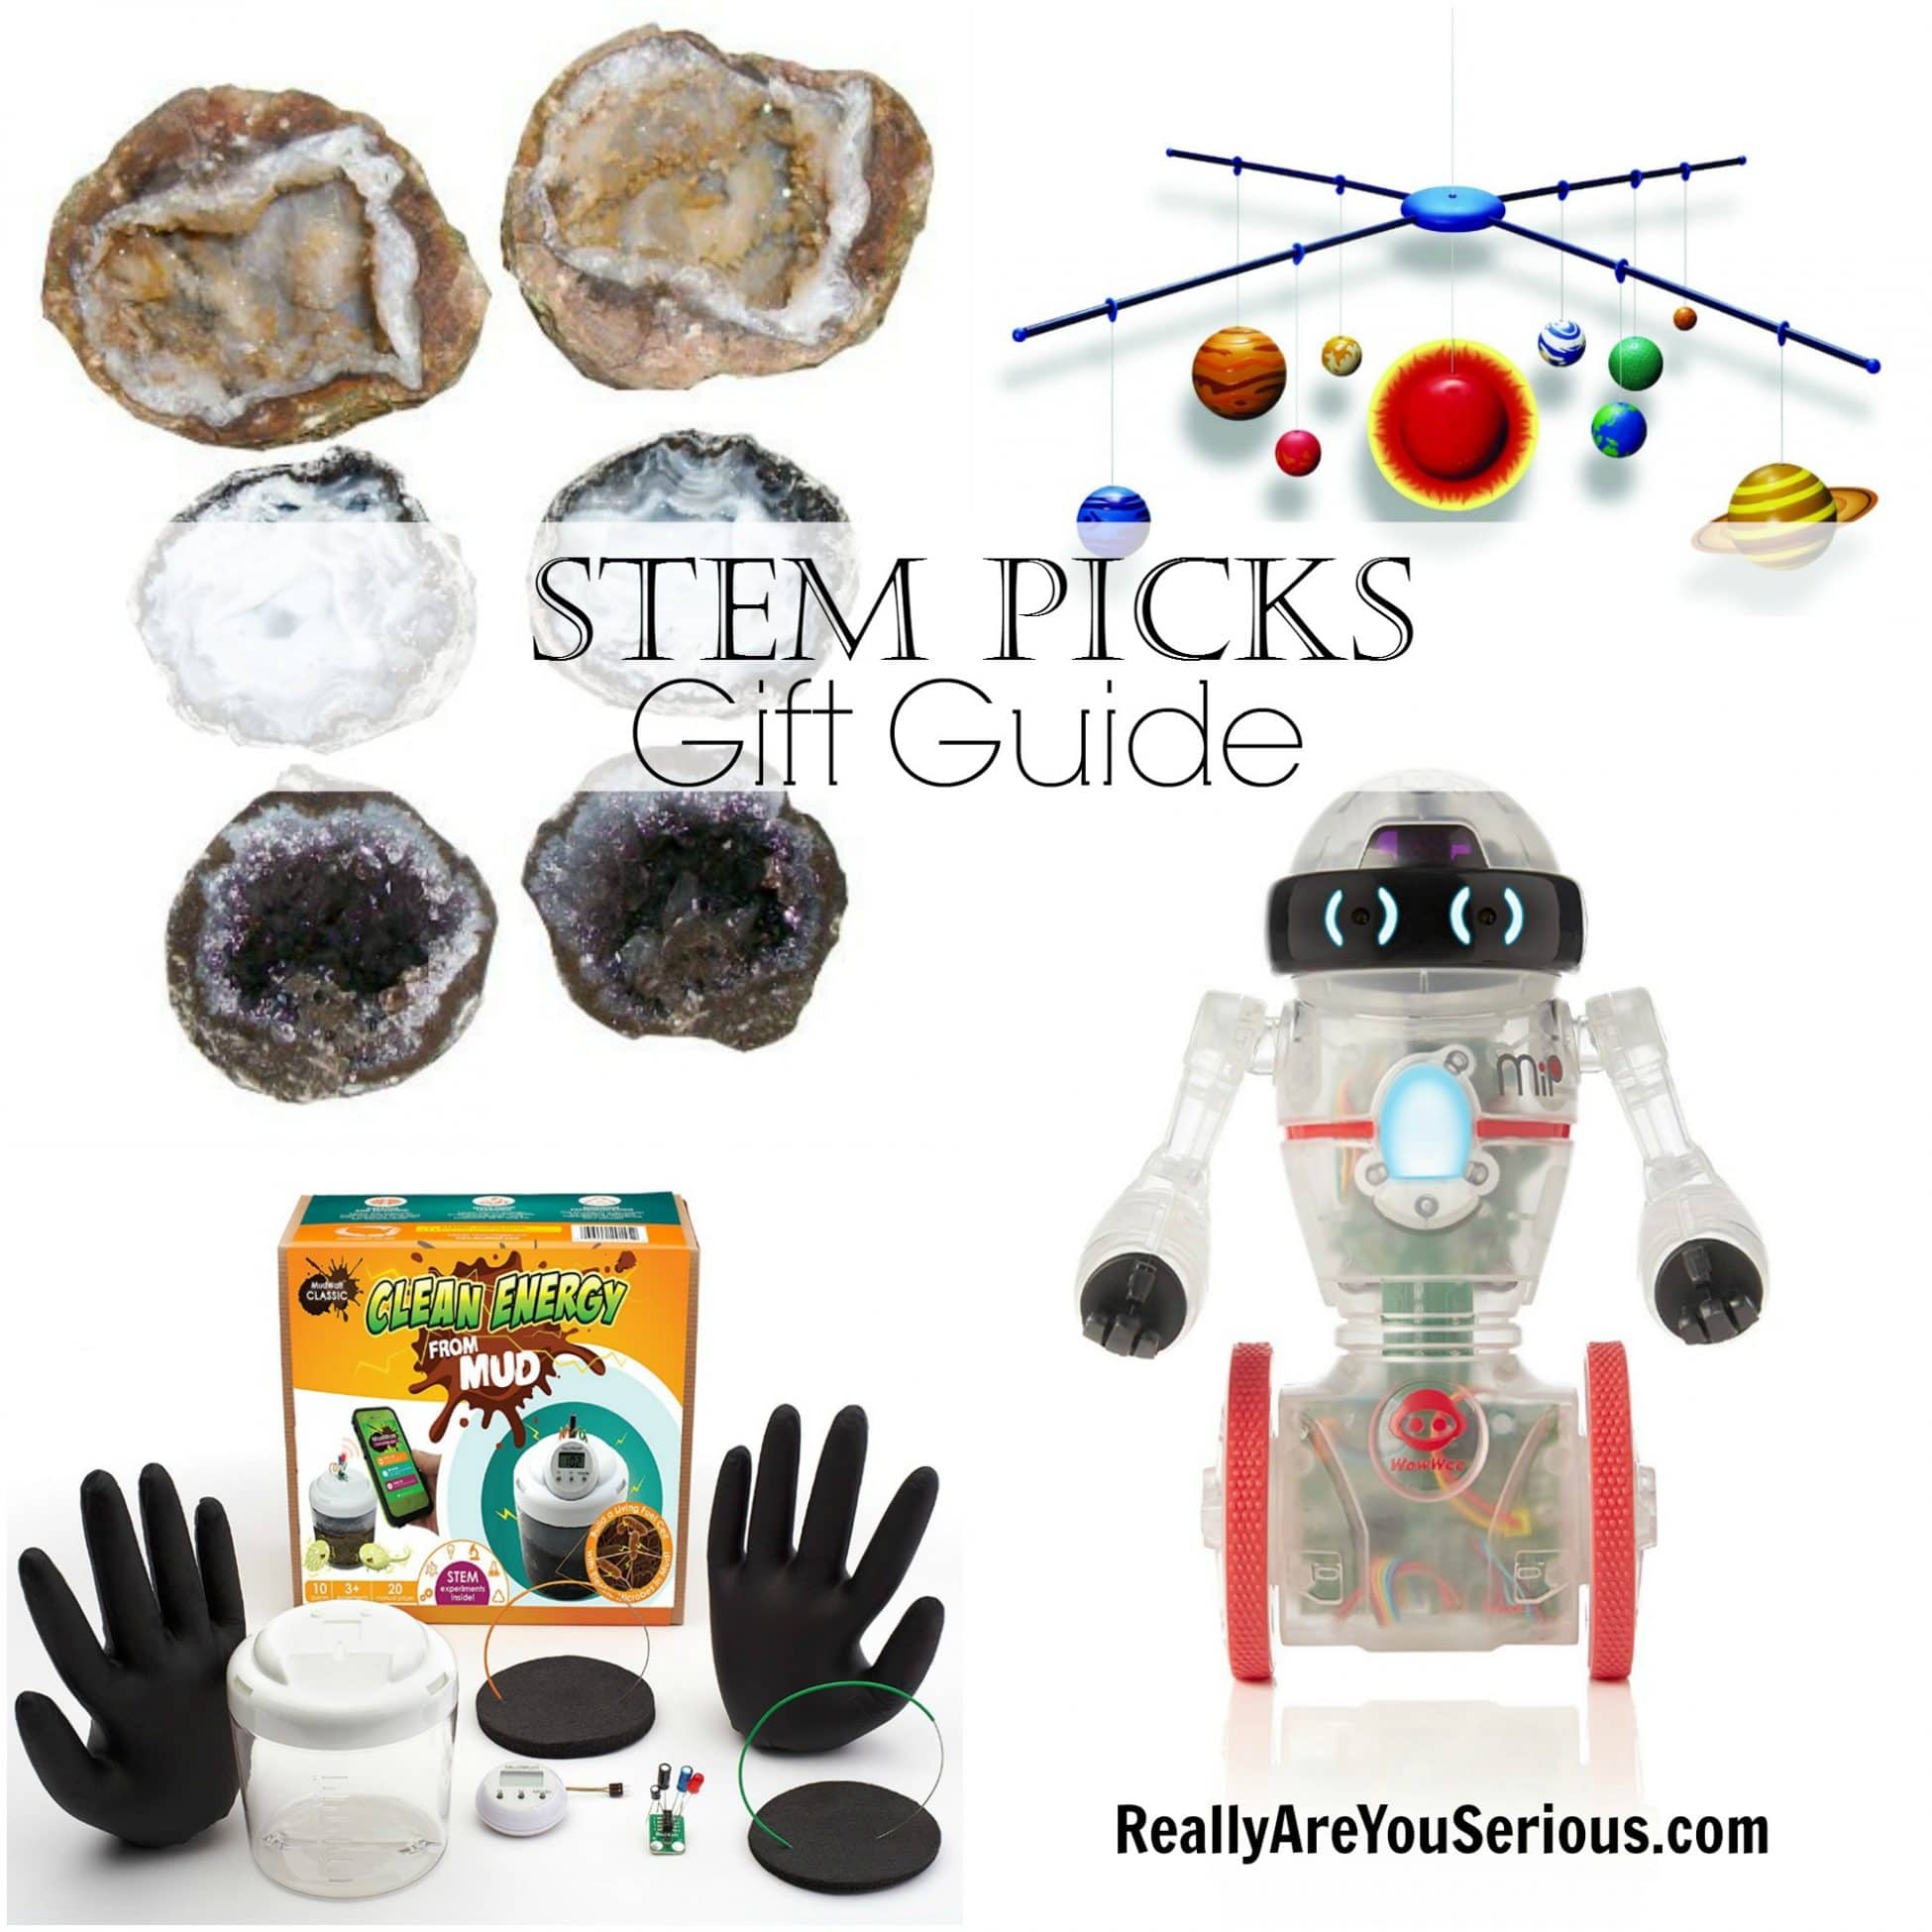 STEM picks for holiday gifts for kids